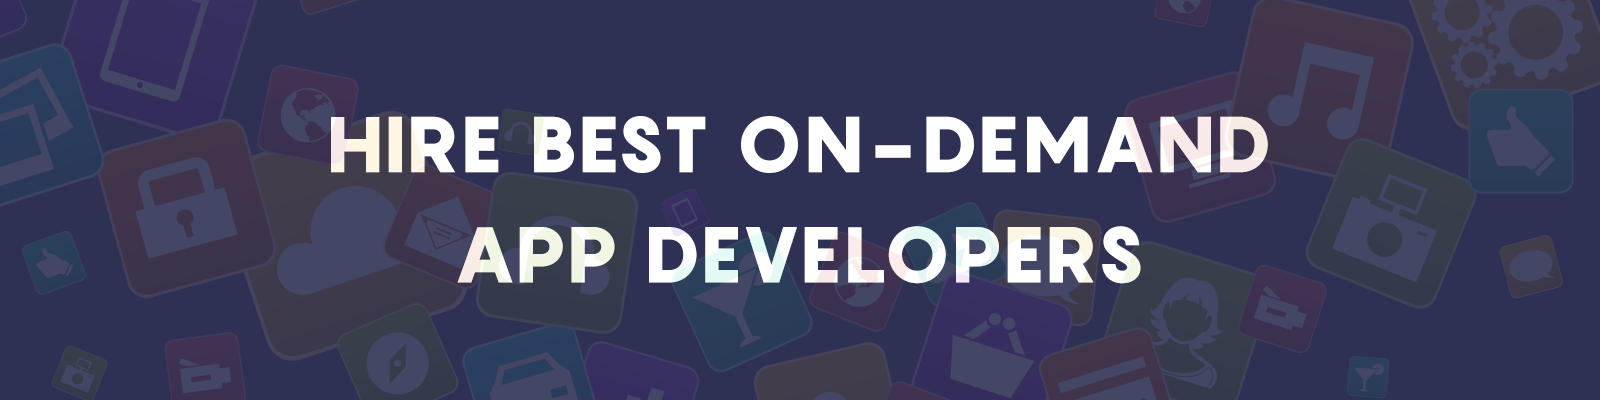 hire on-demand app developers